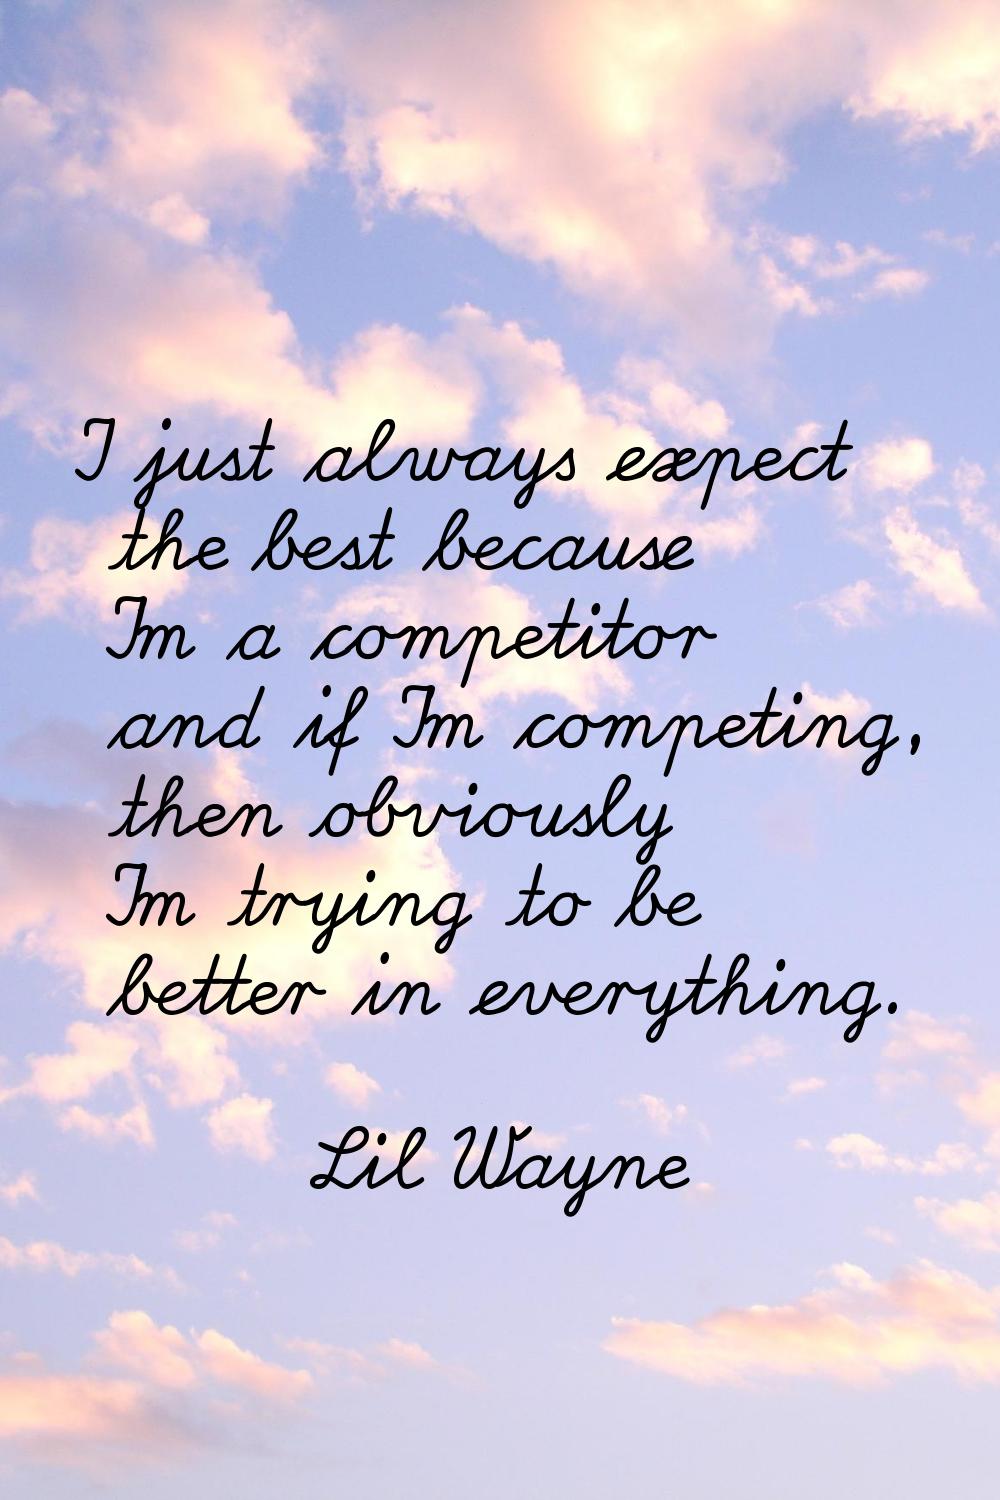 I just always expect the best because I'm a competitor and if I'm competing, then obviously I'm try